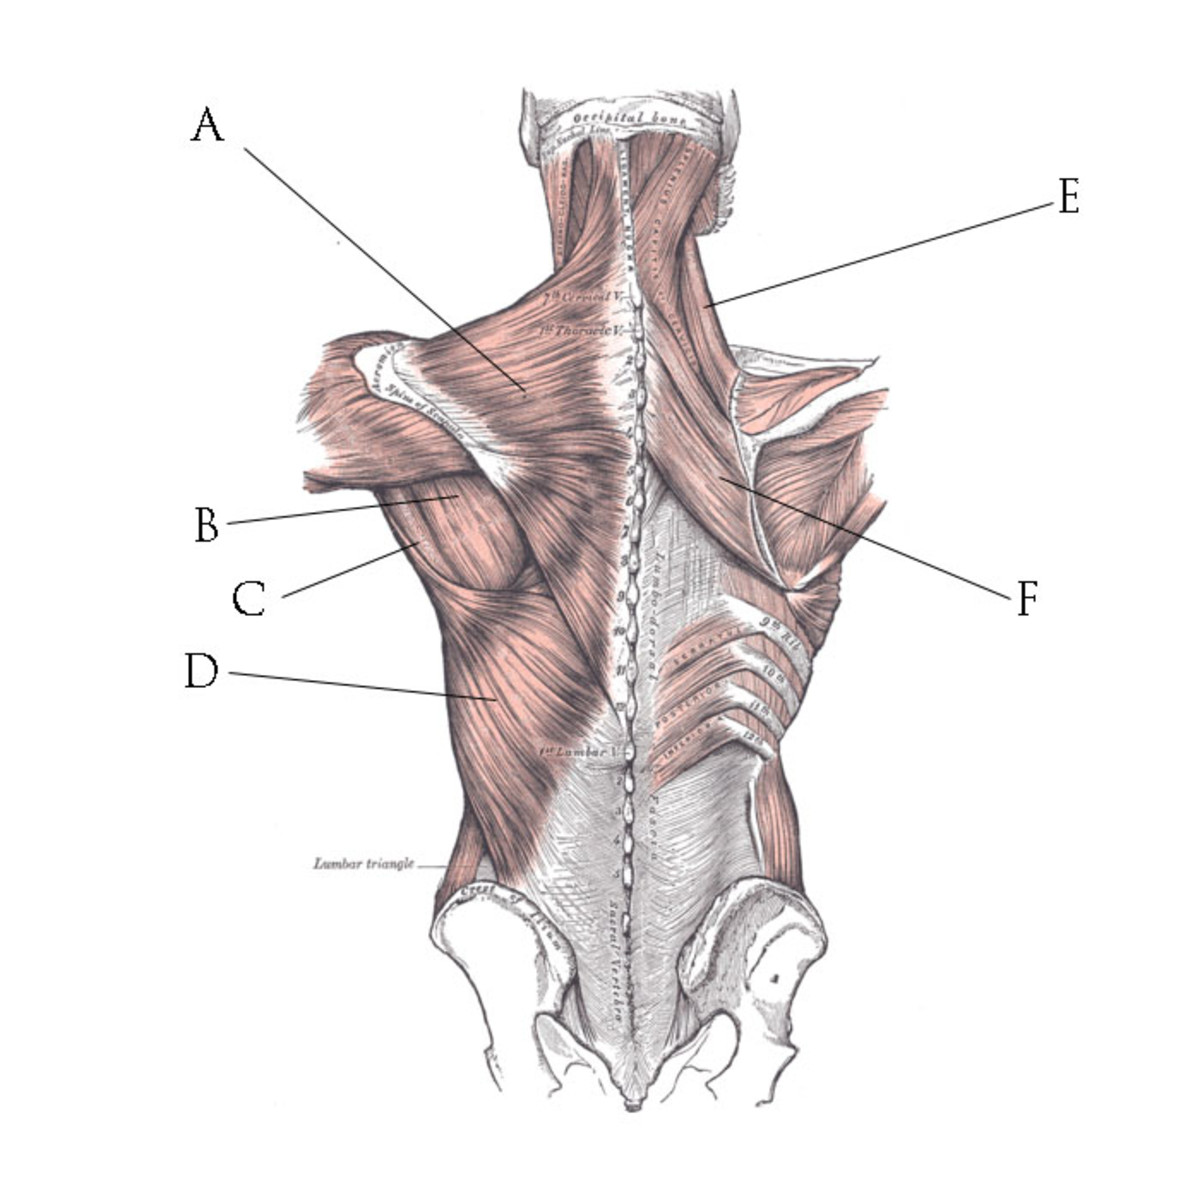 A great illustration of the muscles in the back. A is the trapezius. B and C are Teres Major and Minor, which are responsible for lifting and bringing the arms down. D is the Latissimus Dorsi, which twists the body and bends it side to side.